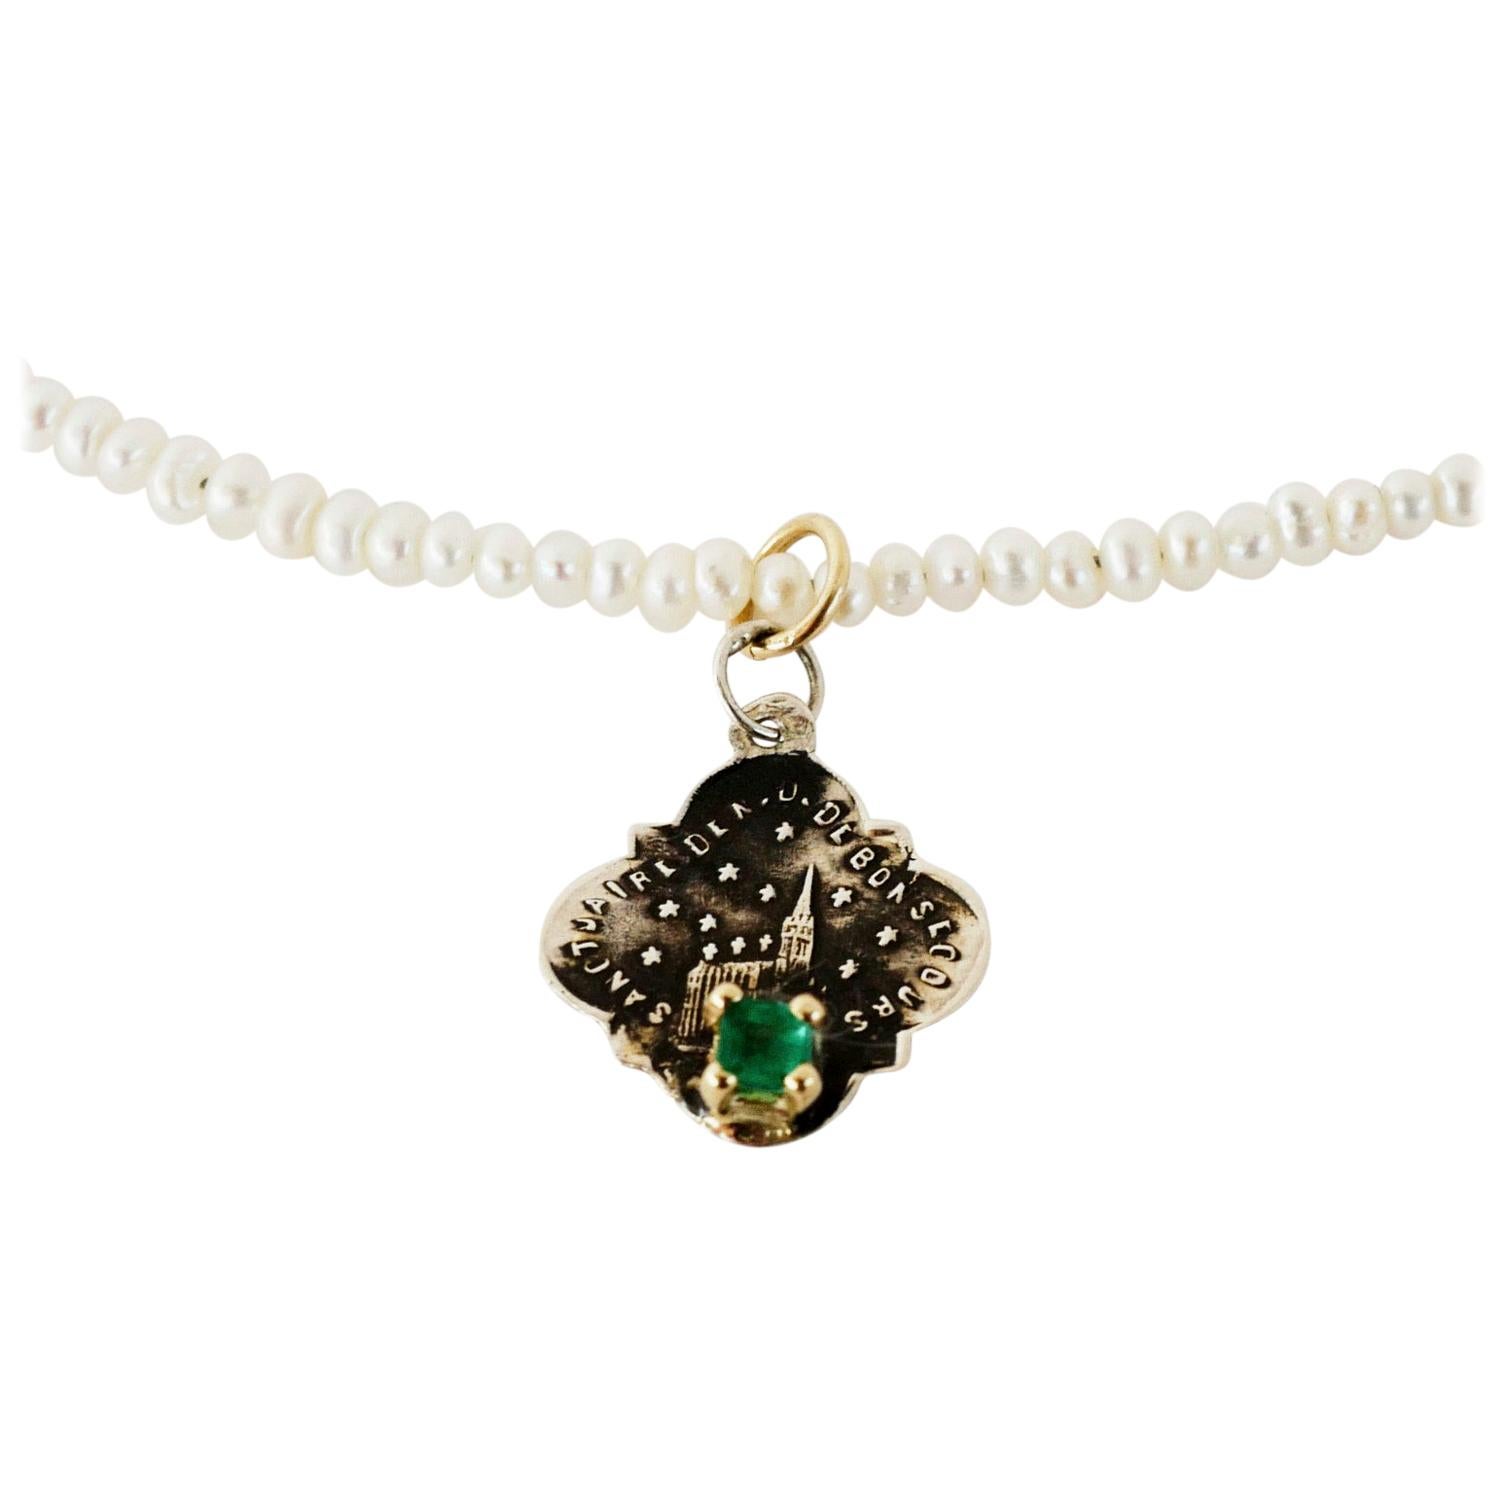 Emerald White Pearl French Silver Spiritual Medal Pendant Chain Necklace